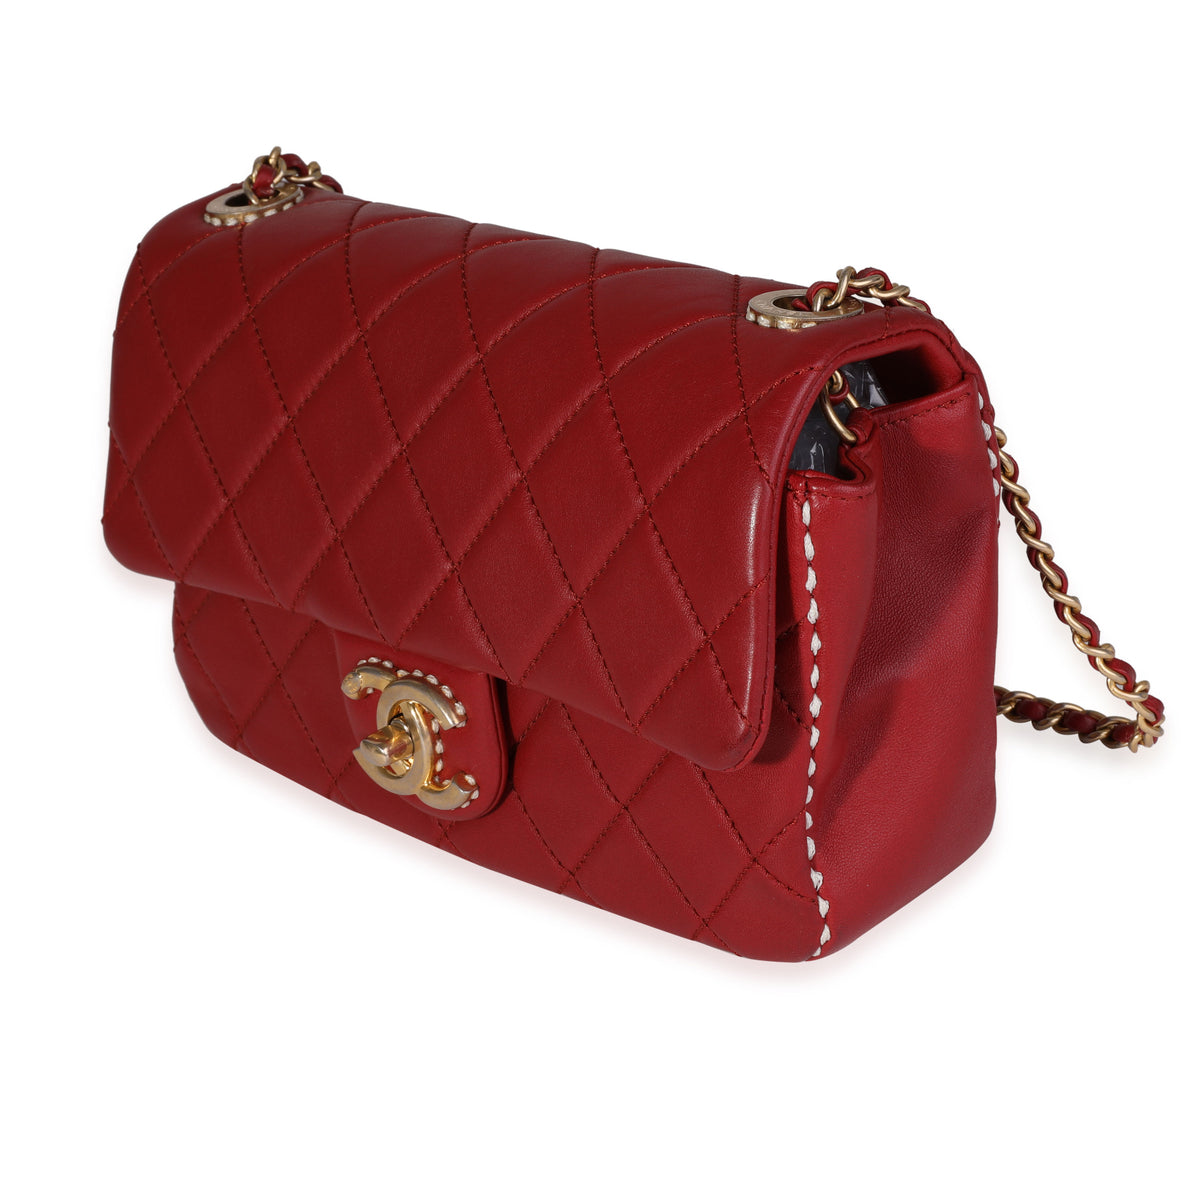 Vintage CHANEL deep red color classic quilted lamb leather tote